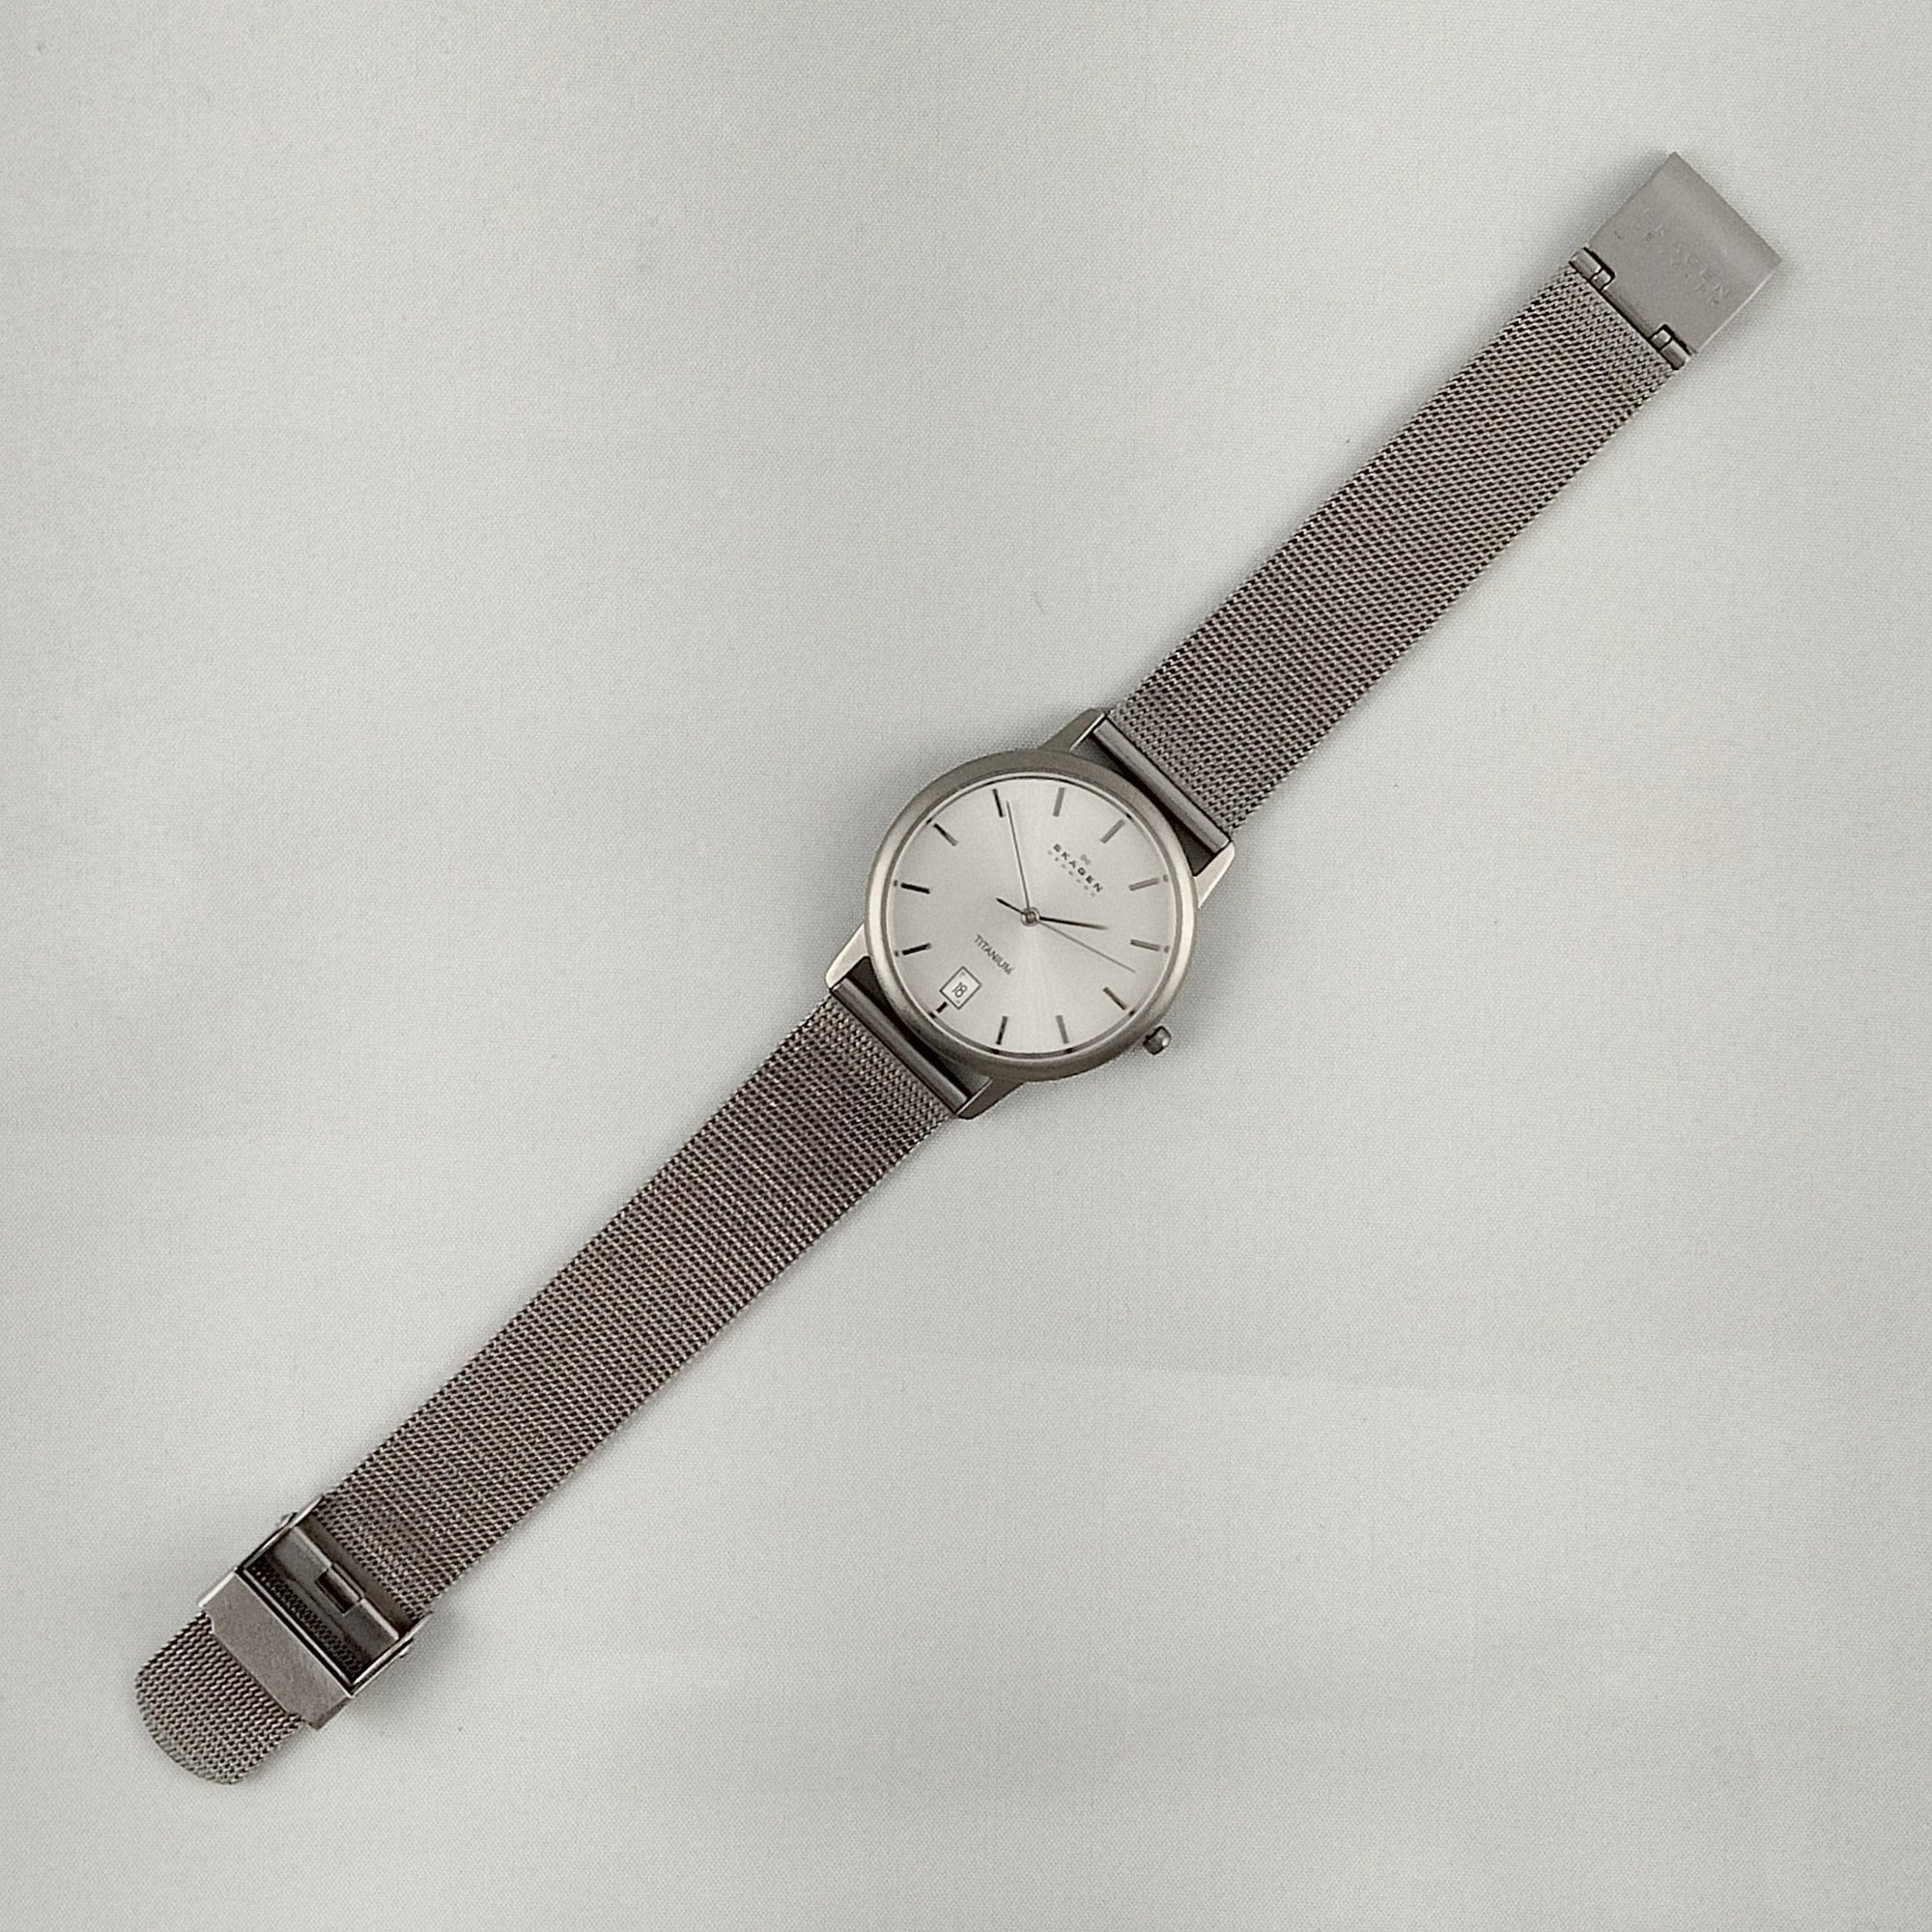 I Like Mikes Mid Century Modern Watches Skagen Men's Stainless Steel Watch, Large White Dial, Mesh Strap